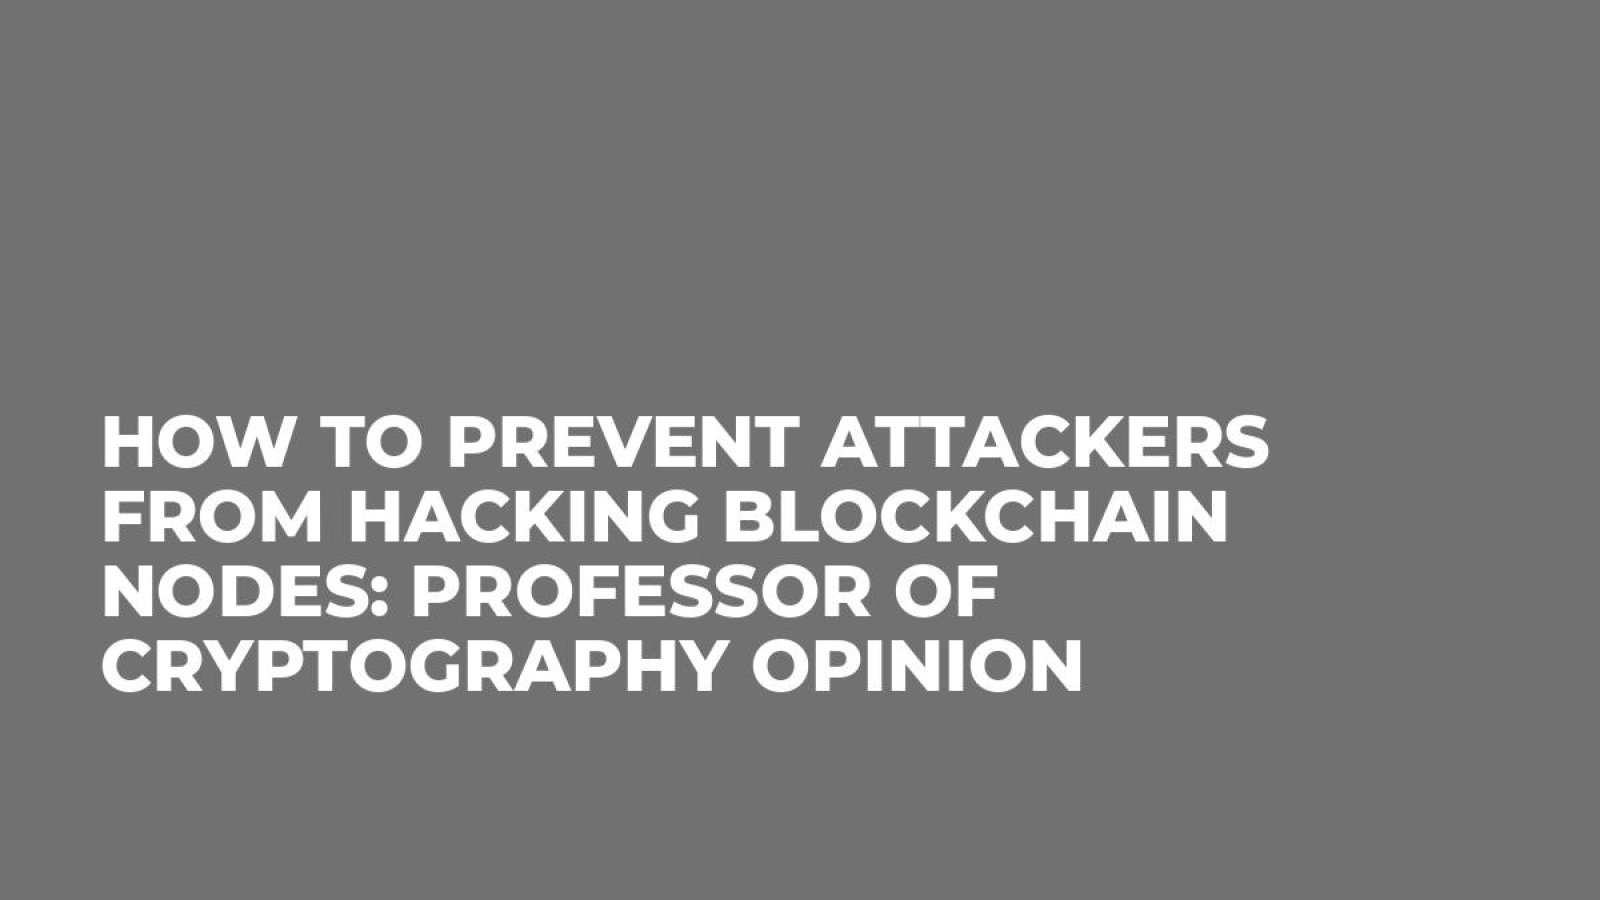 How to Prevent Attackers From Hacking Blockchain Nodes: Professor of Cryptography Opinion